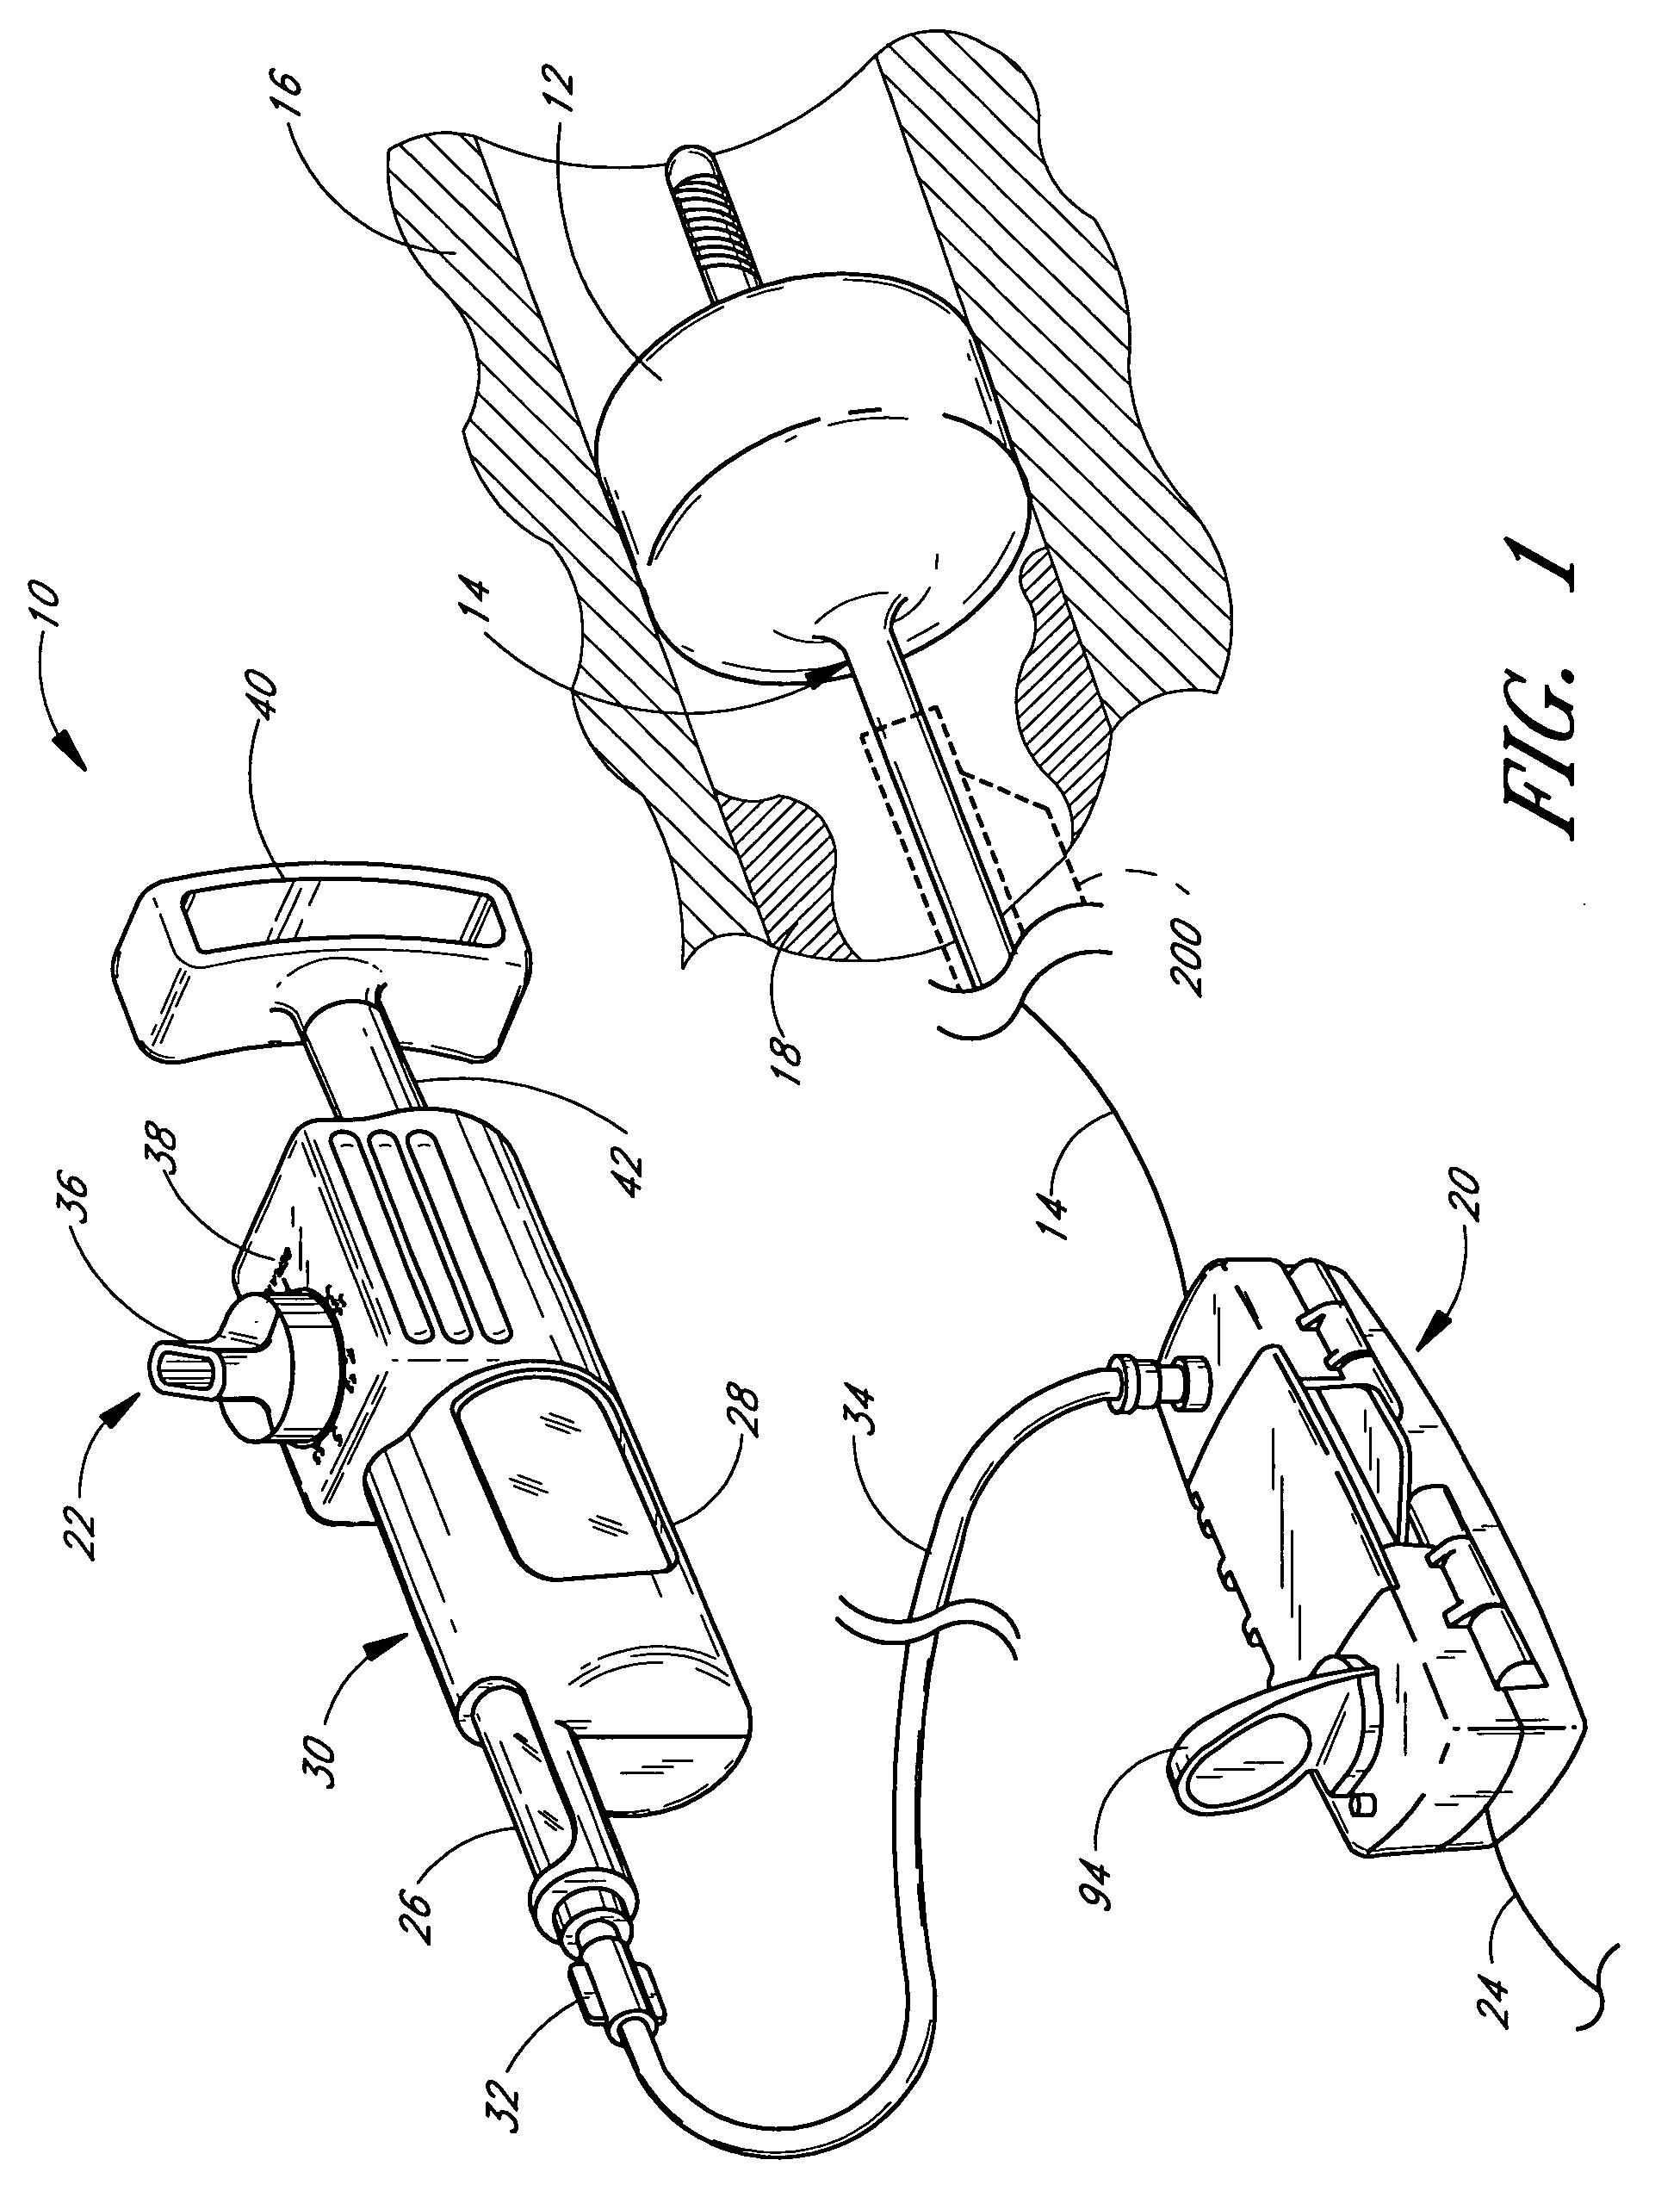 Methods and apparatuses for drug delivery to an intravascular occlusion